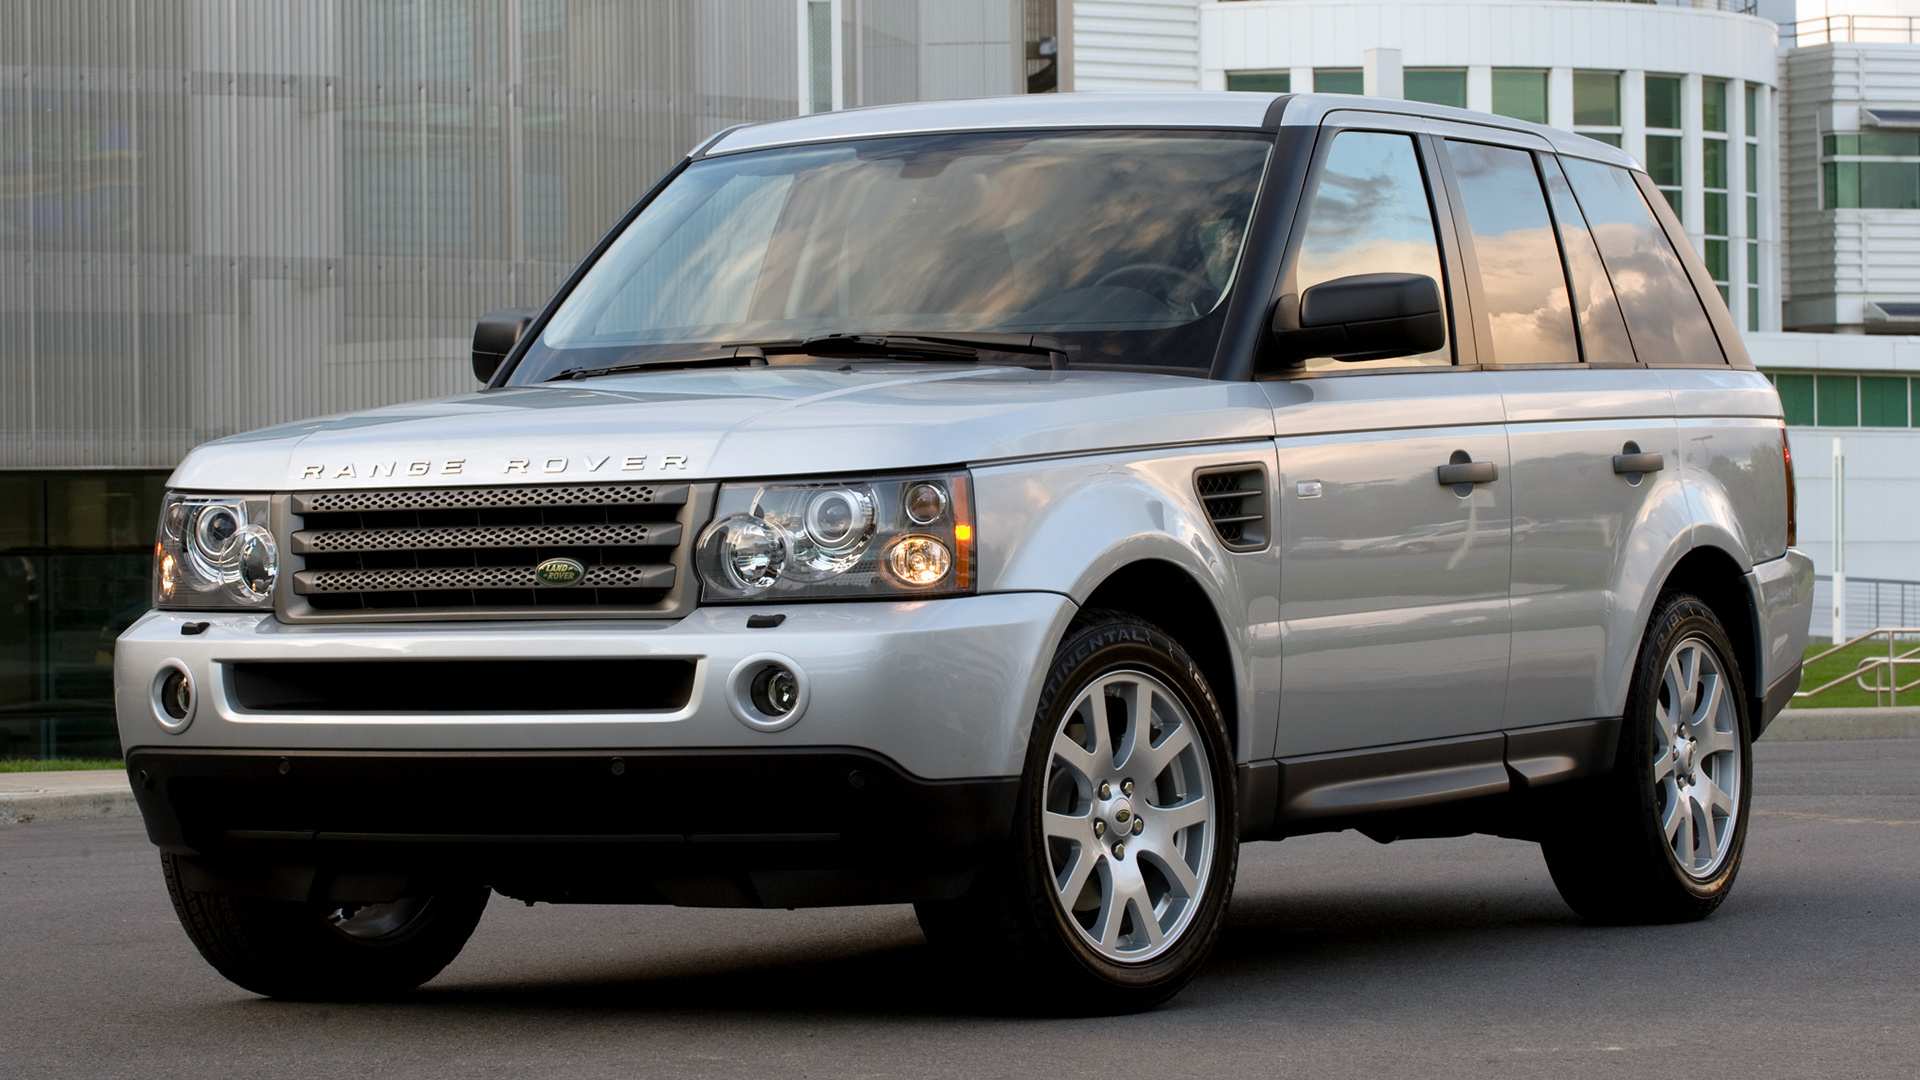 2006 Range Rover Sport HSE (US) Wallpapers and HD Images